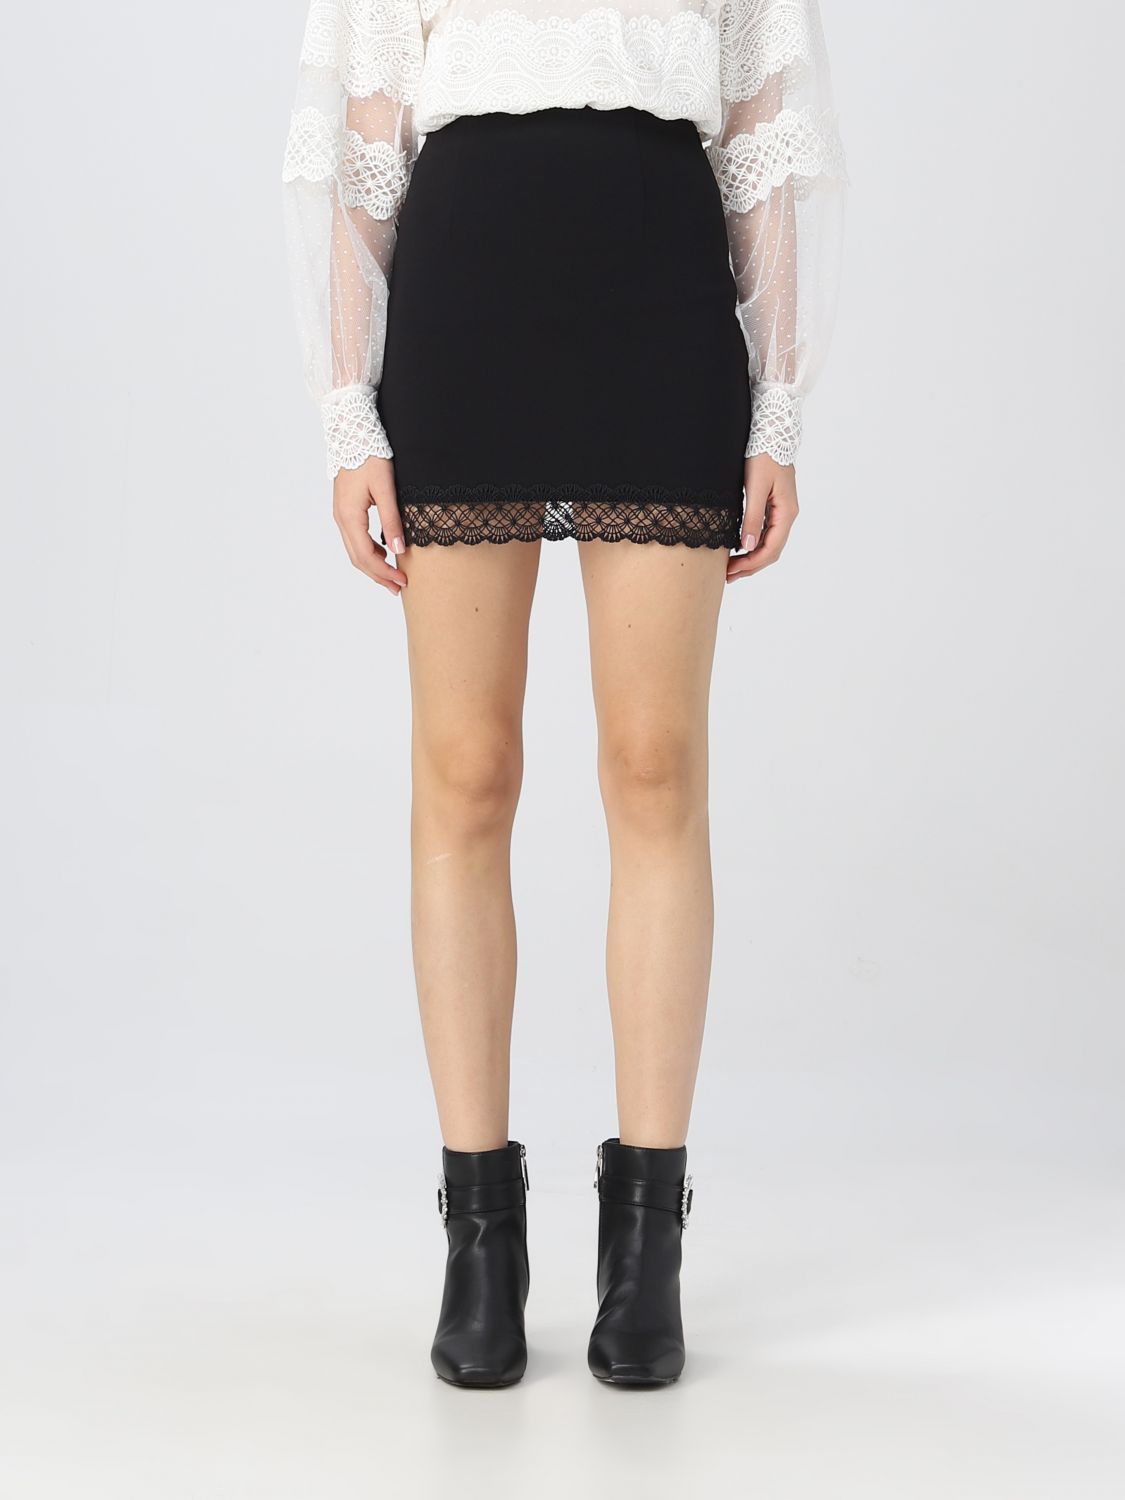 Twinset Skirt For Woman Black Twinset Skirt 222tp2313 Online At Gigliocom 7163